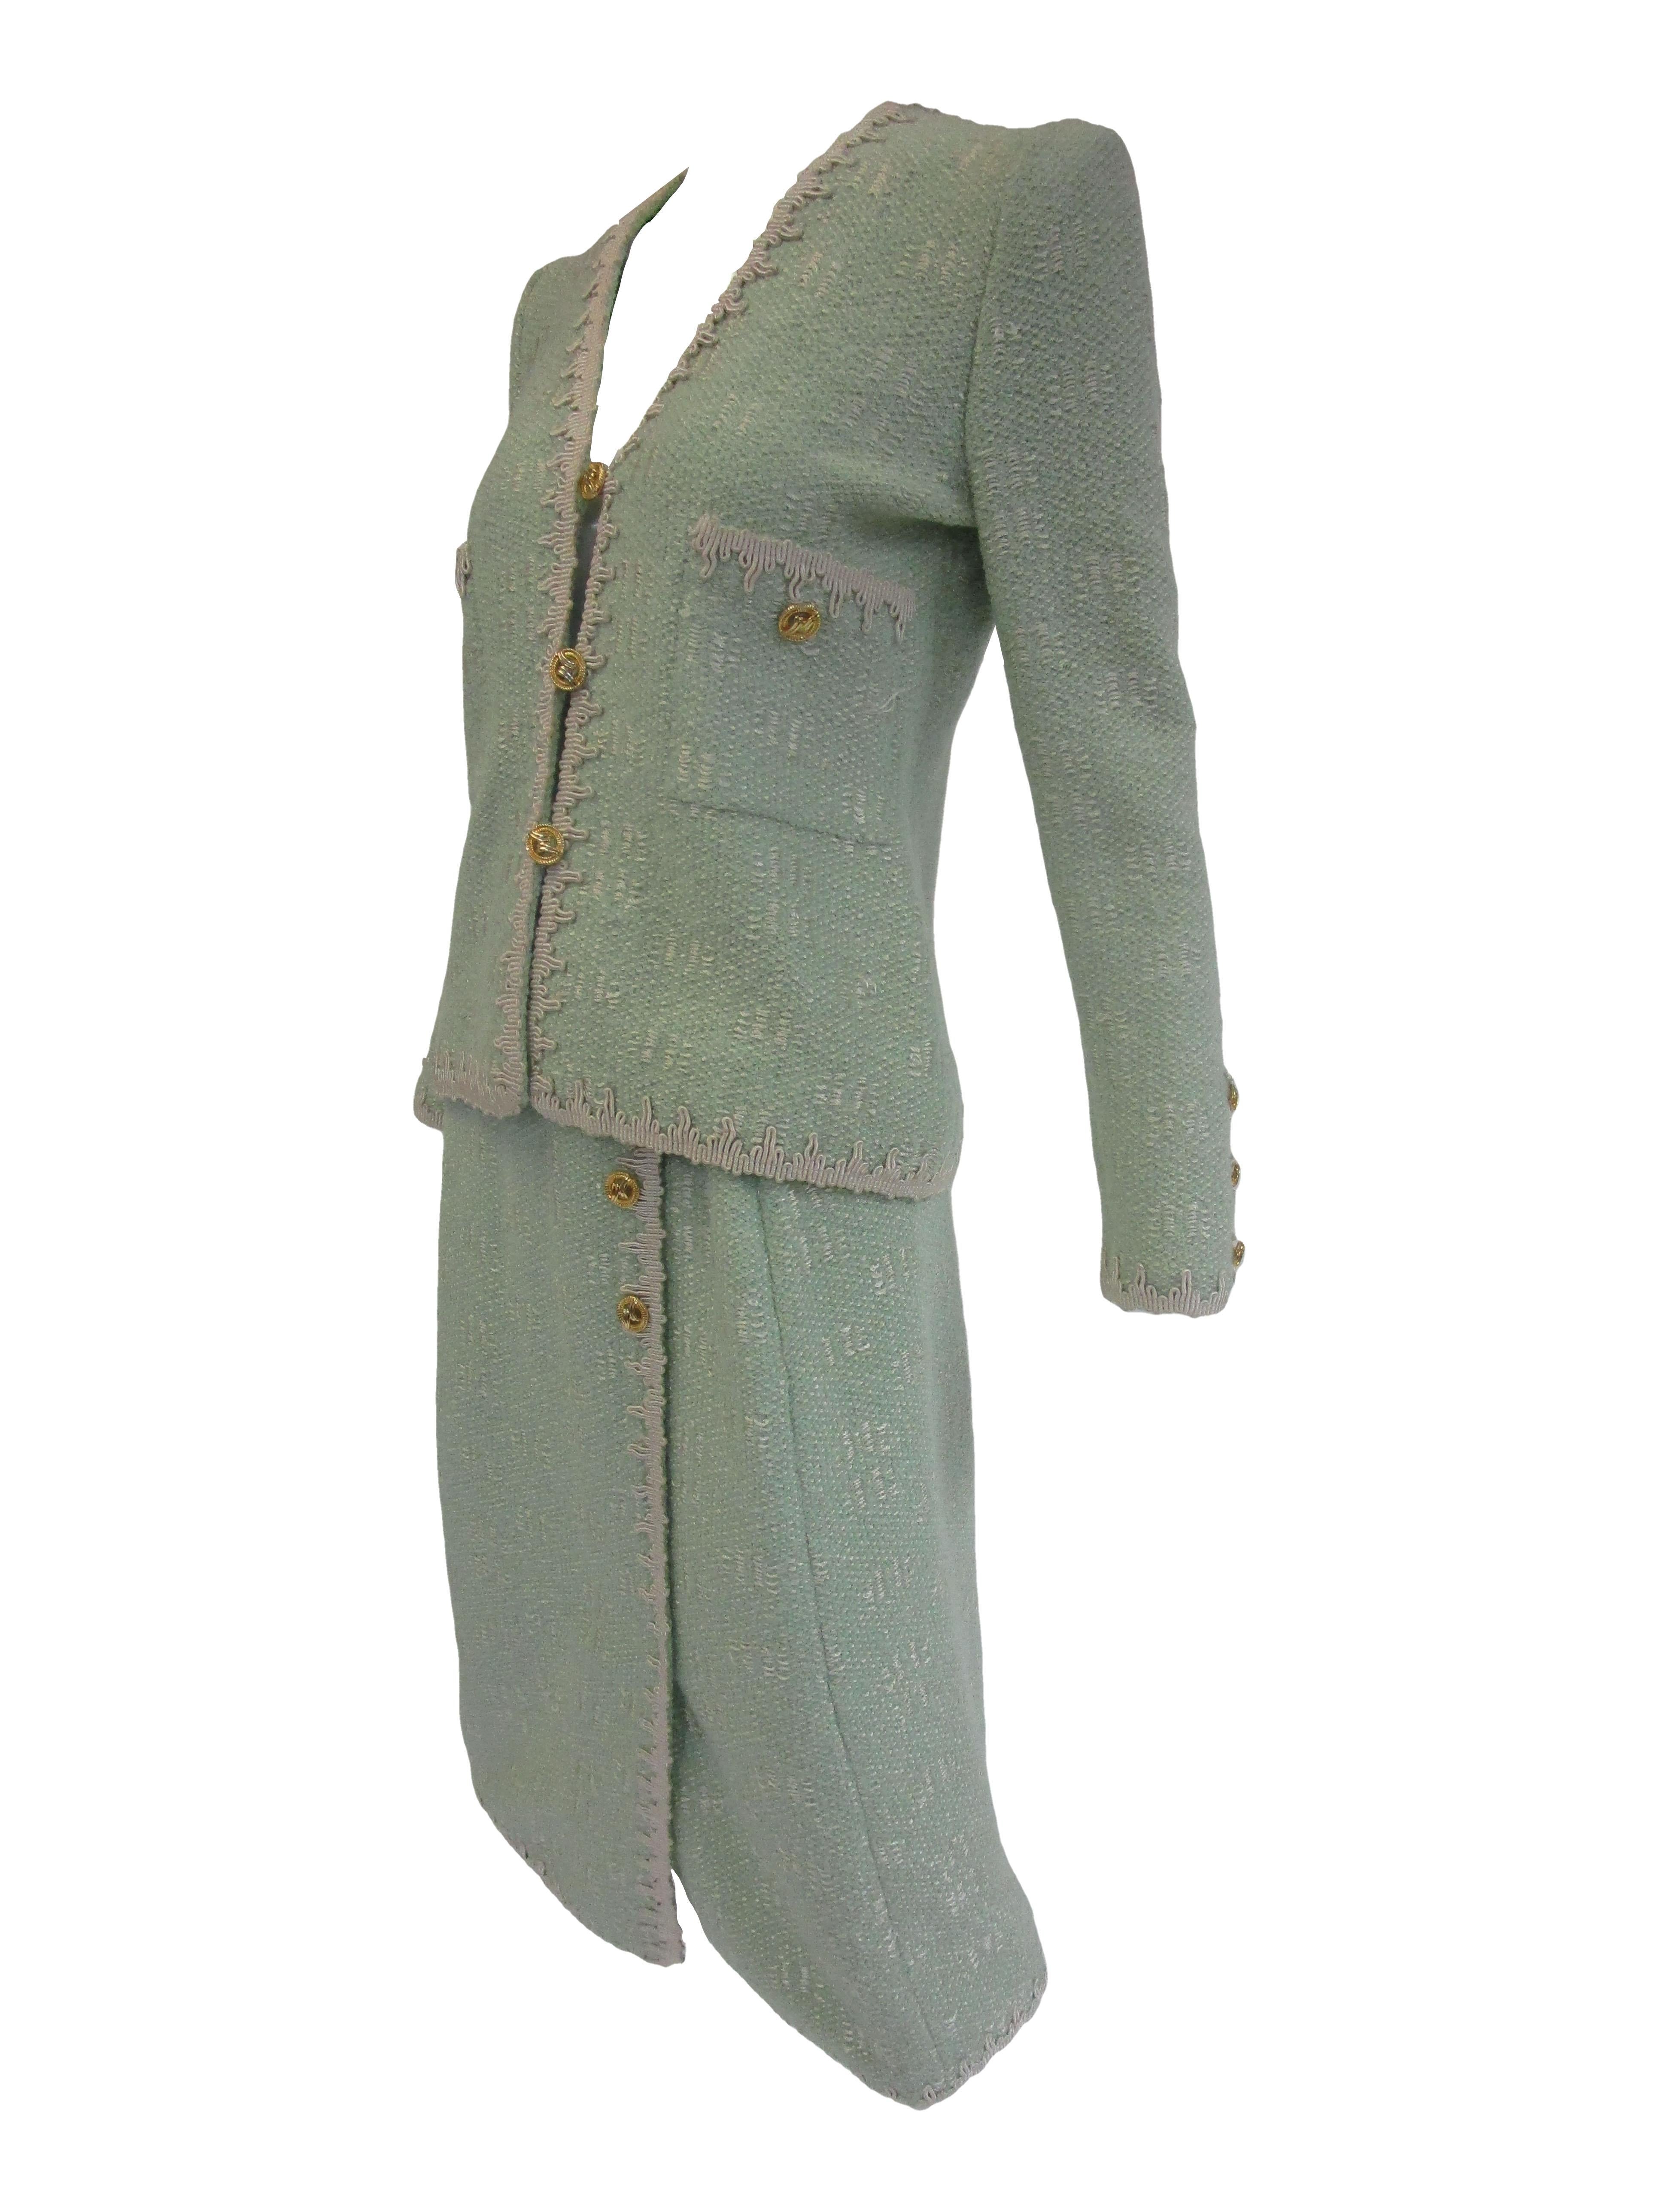 1970s Adolfo Mint Green Wool Knit Skirt and Jacket In Good Condition For Sale In Houston, TX